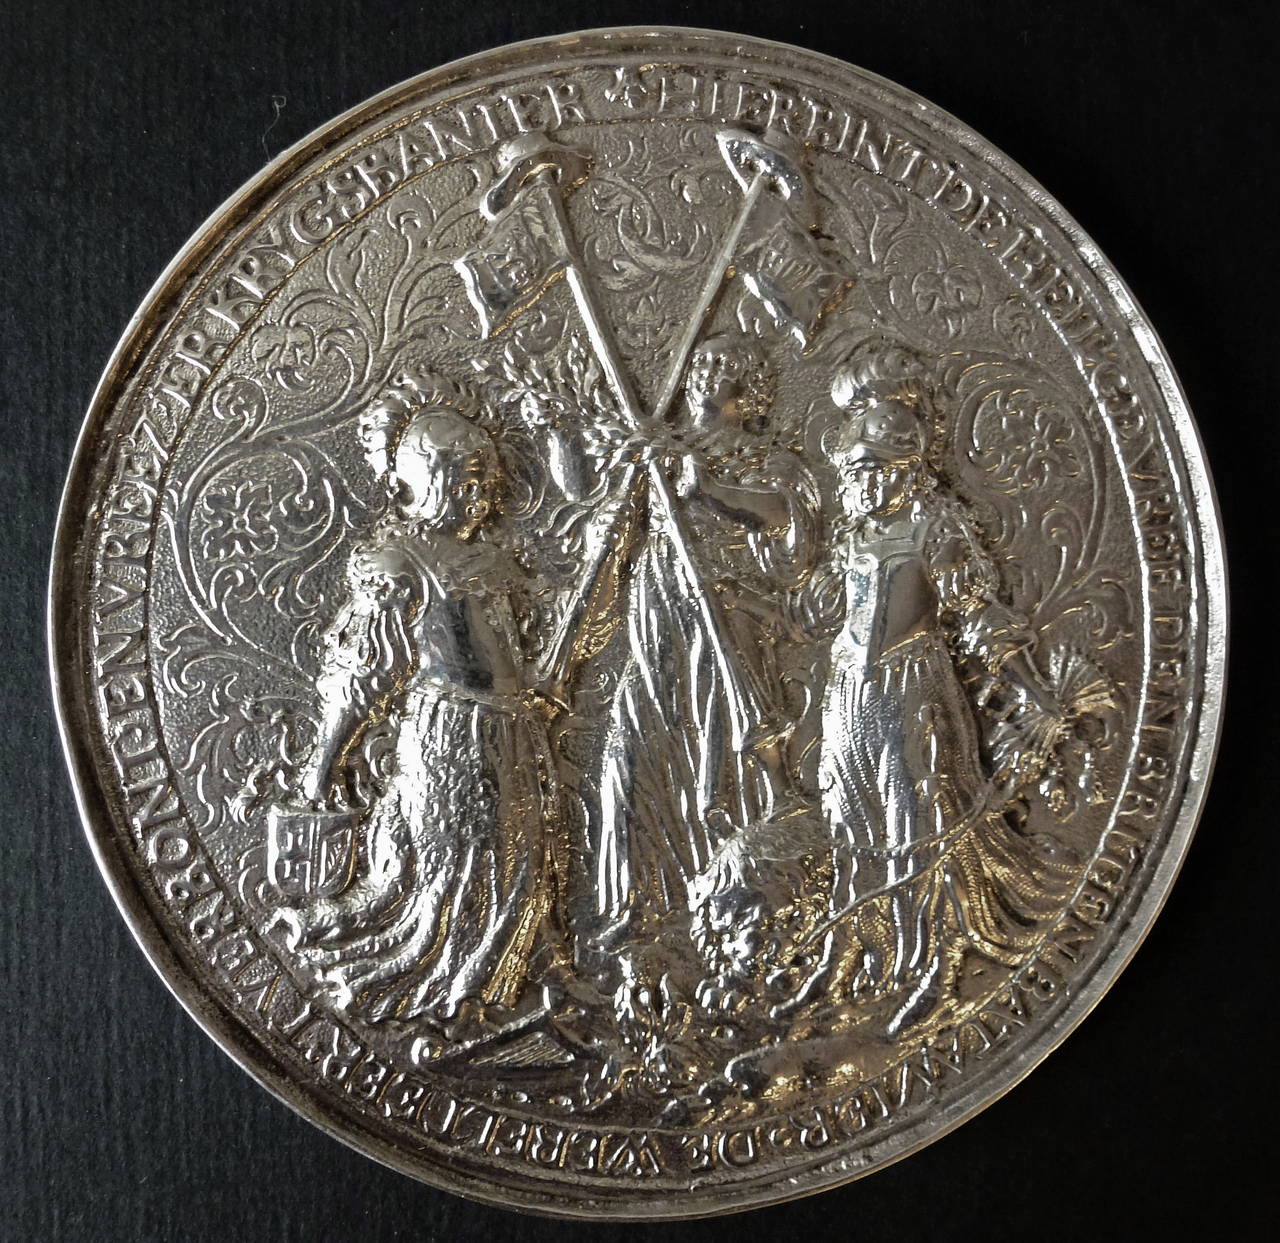 Maker's mark of Wouter Muller
Amsterdam, circa 1654

One side depicting the treaty of Westminster, decorated with arabesques against matted ground depicting three women: Brittania holding a coat of arms in one hand and a flagpole in the other